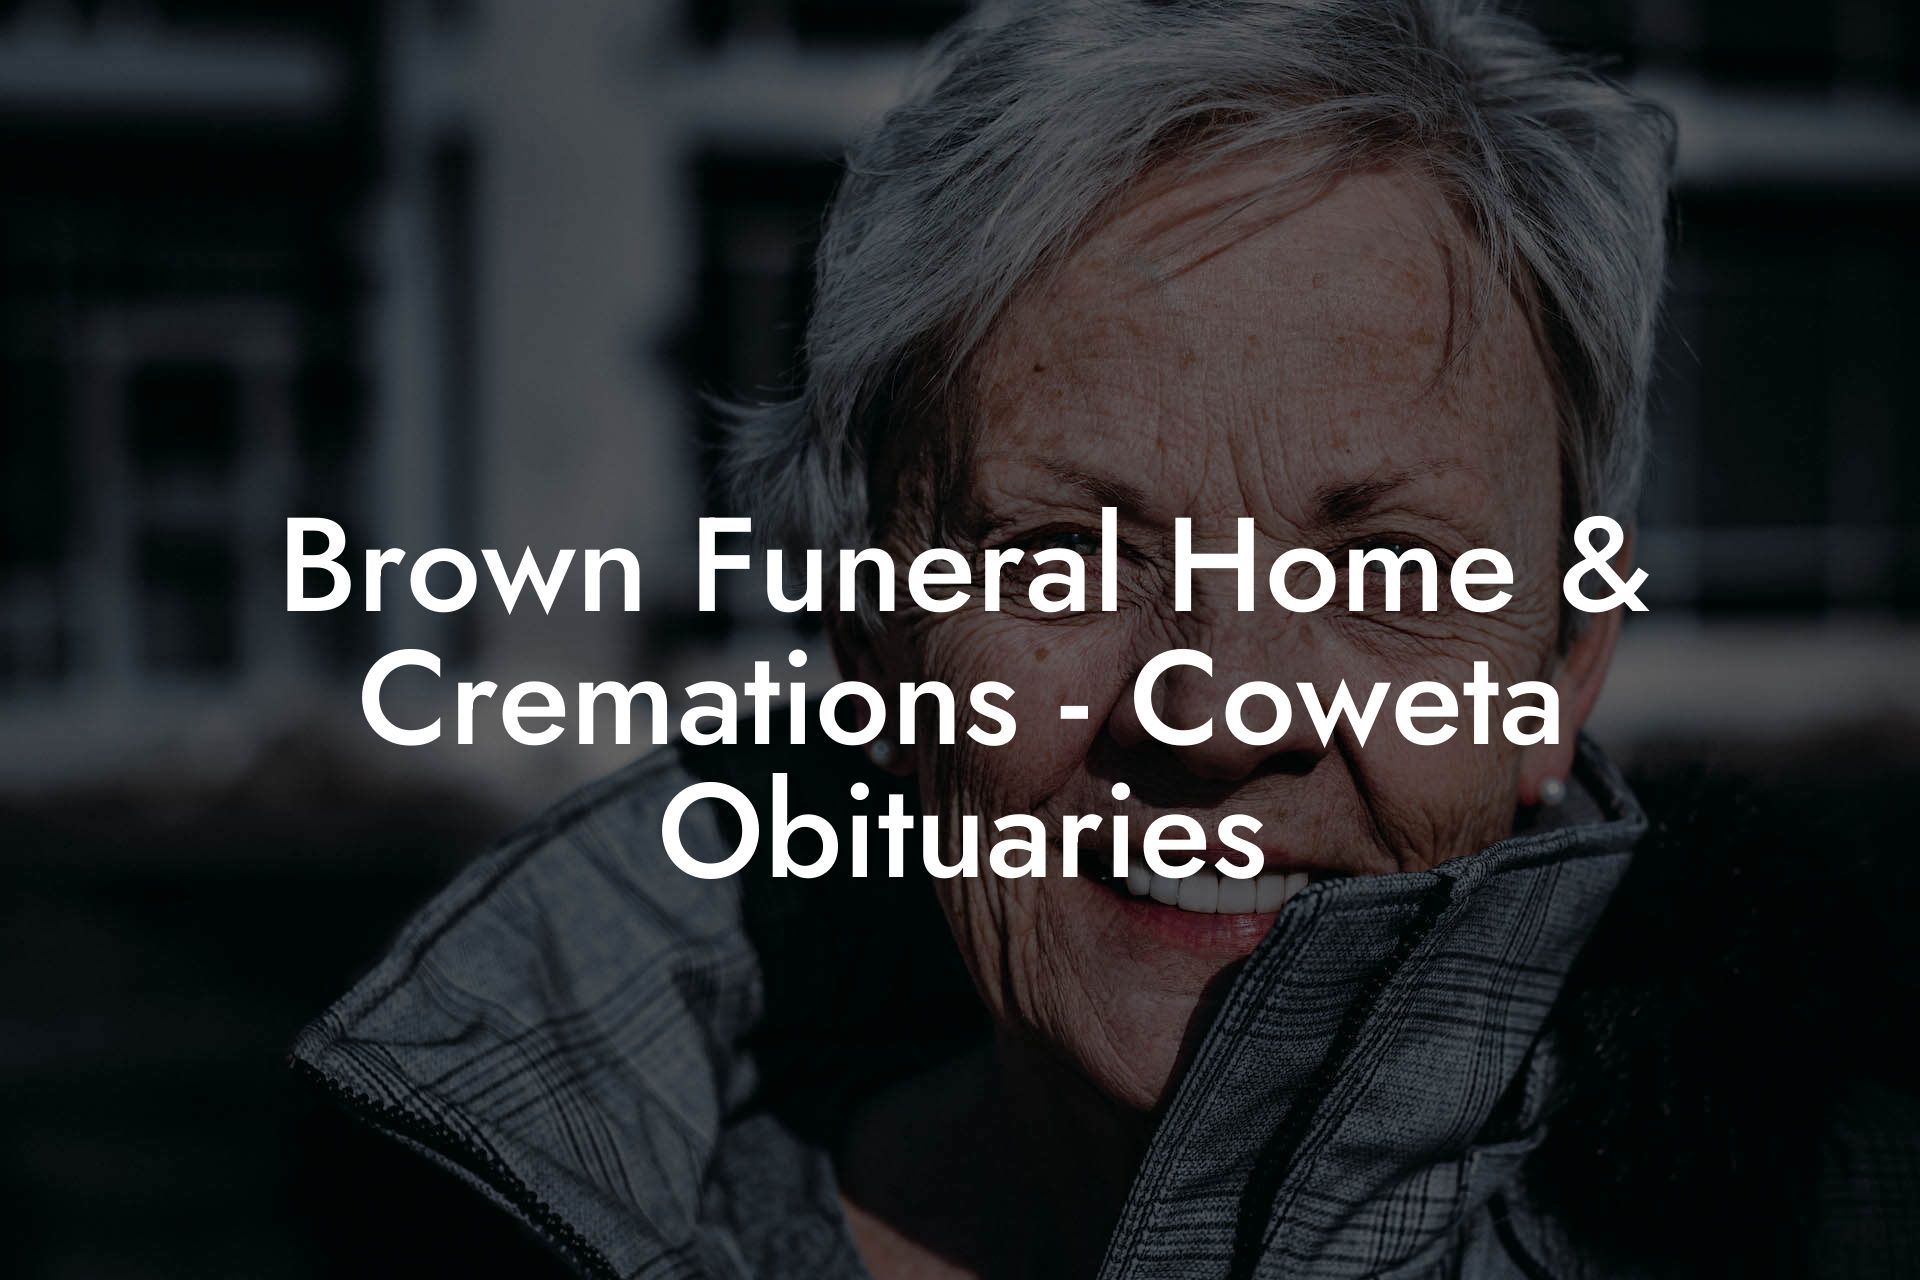 Brown Funeral Home & Cremations - Coweta Obituaries